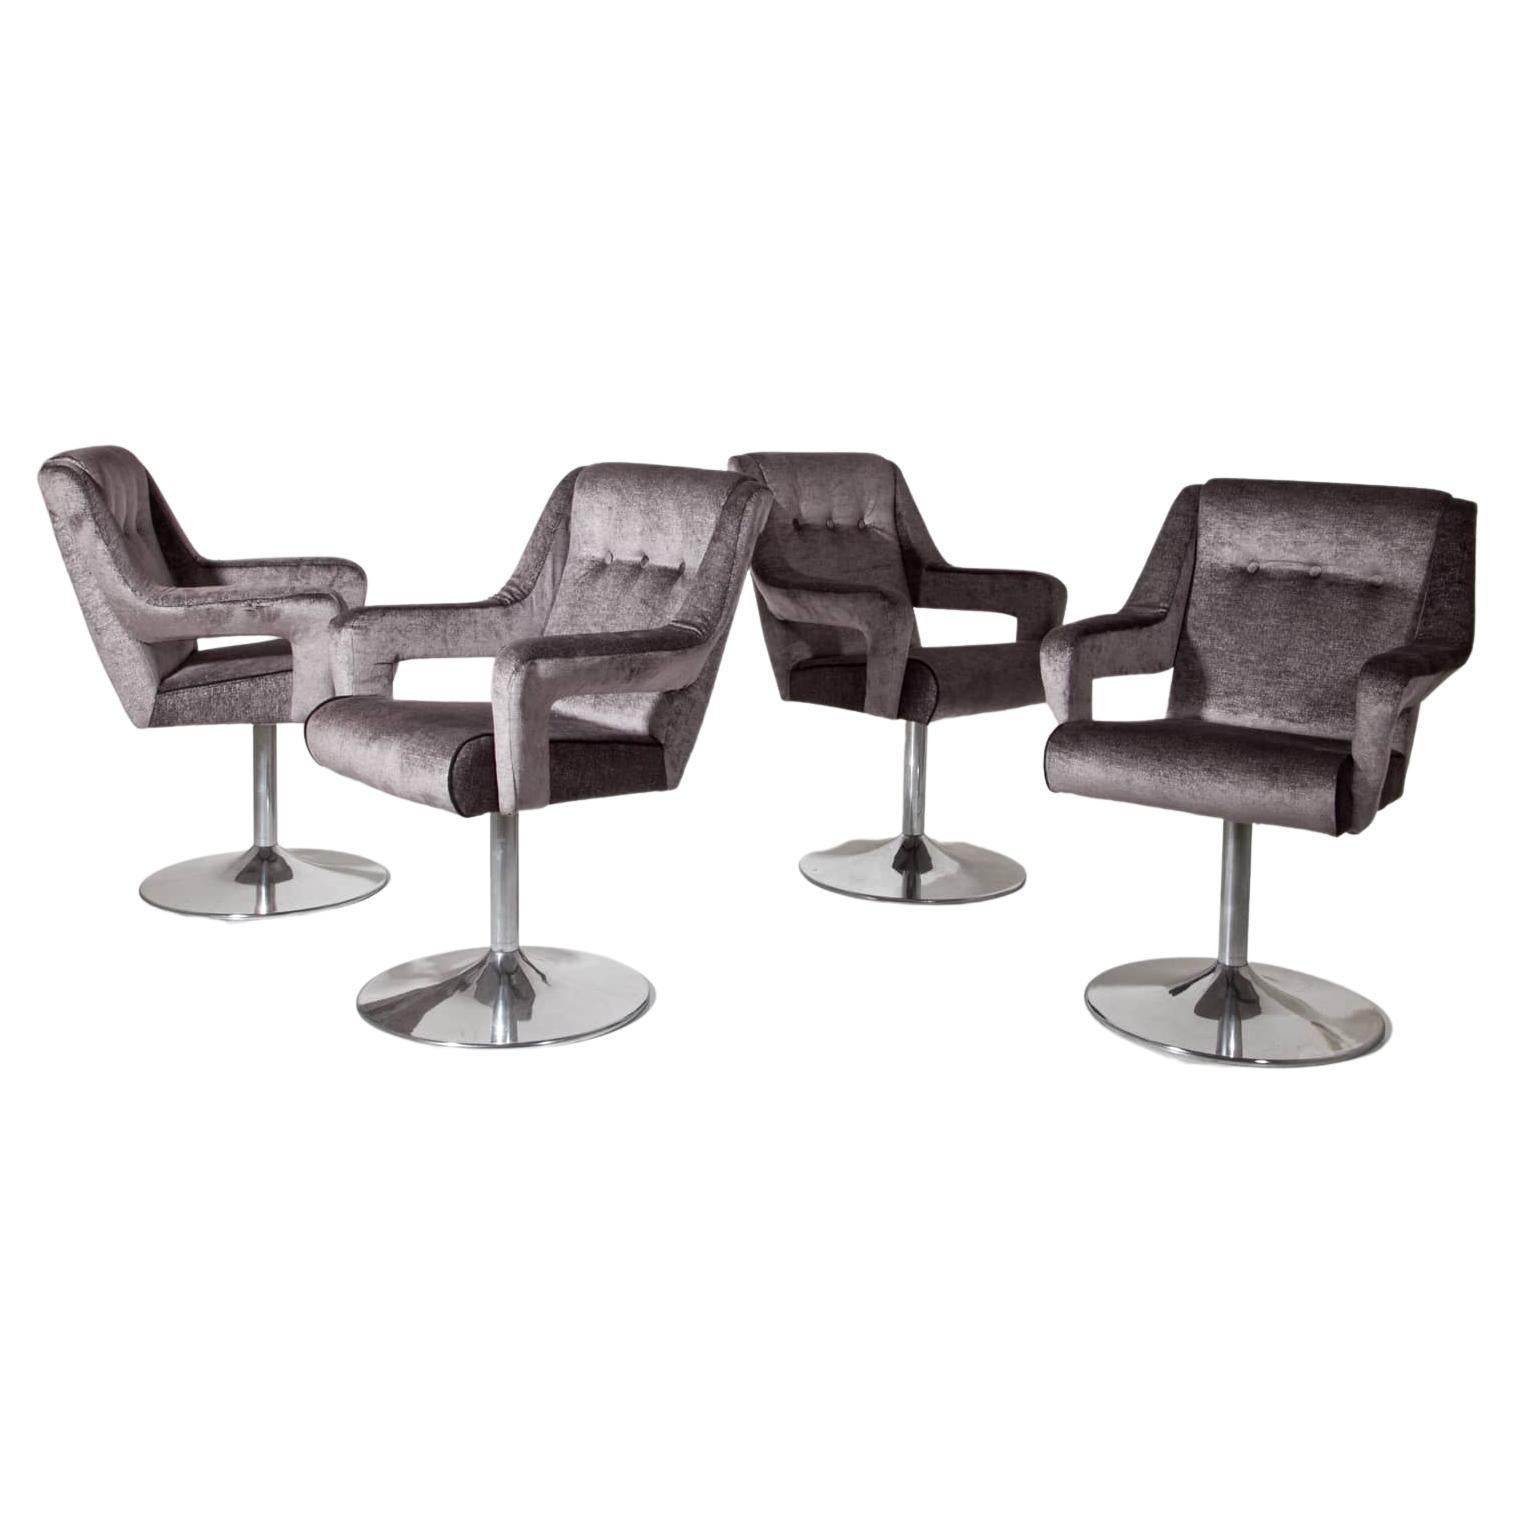 Set of Four Metal Swivel Chairs, Italy, Mid-20th Century For Sale